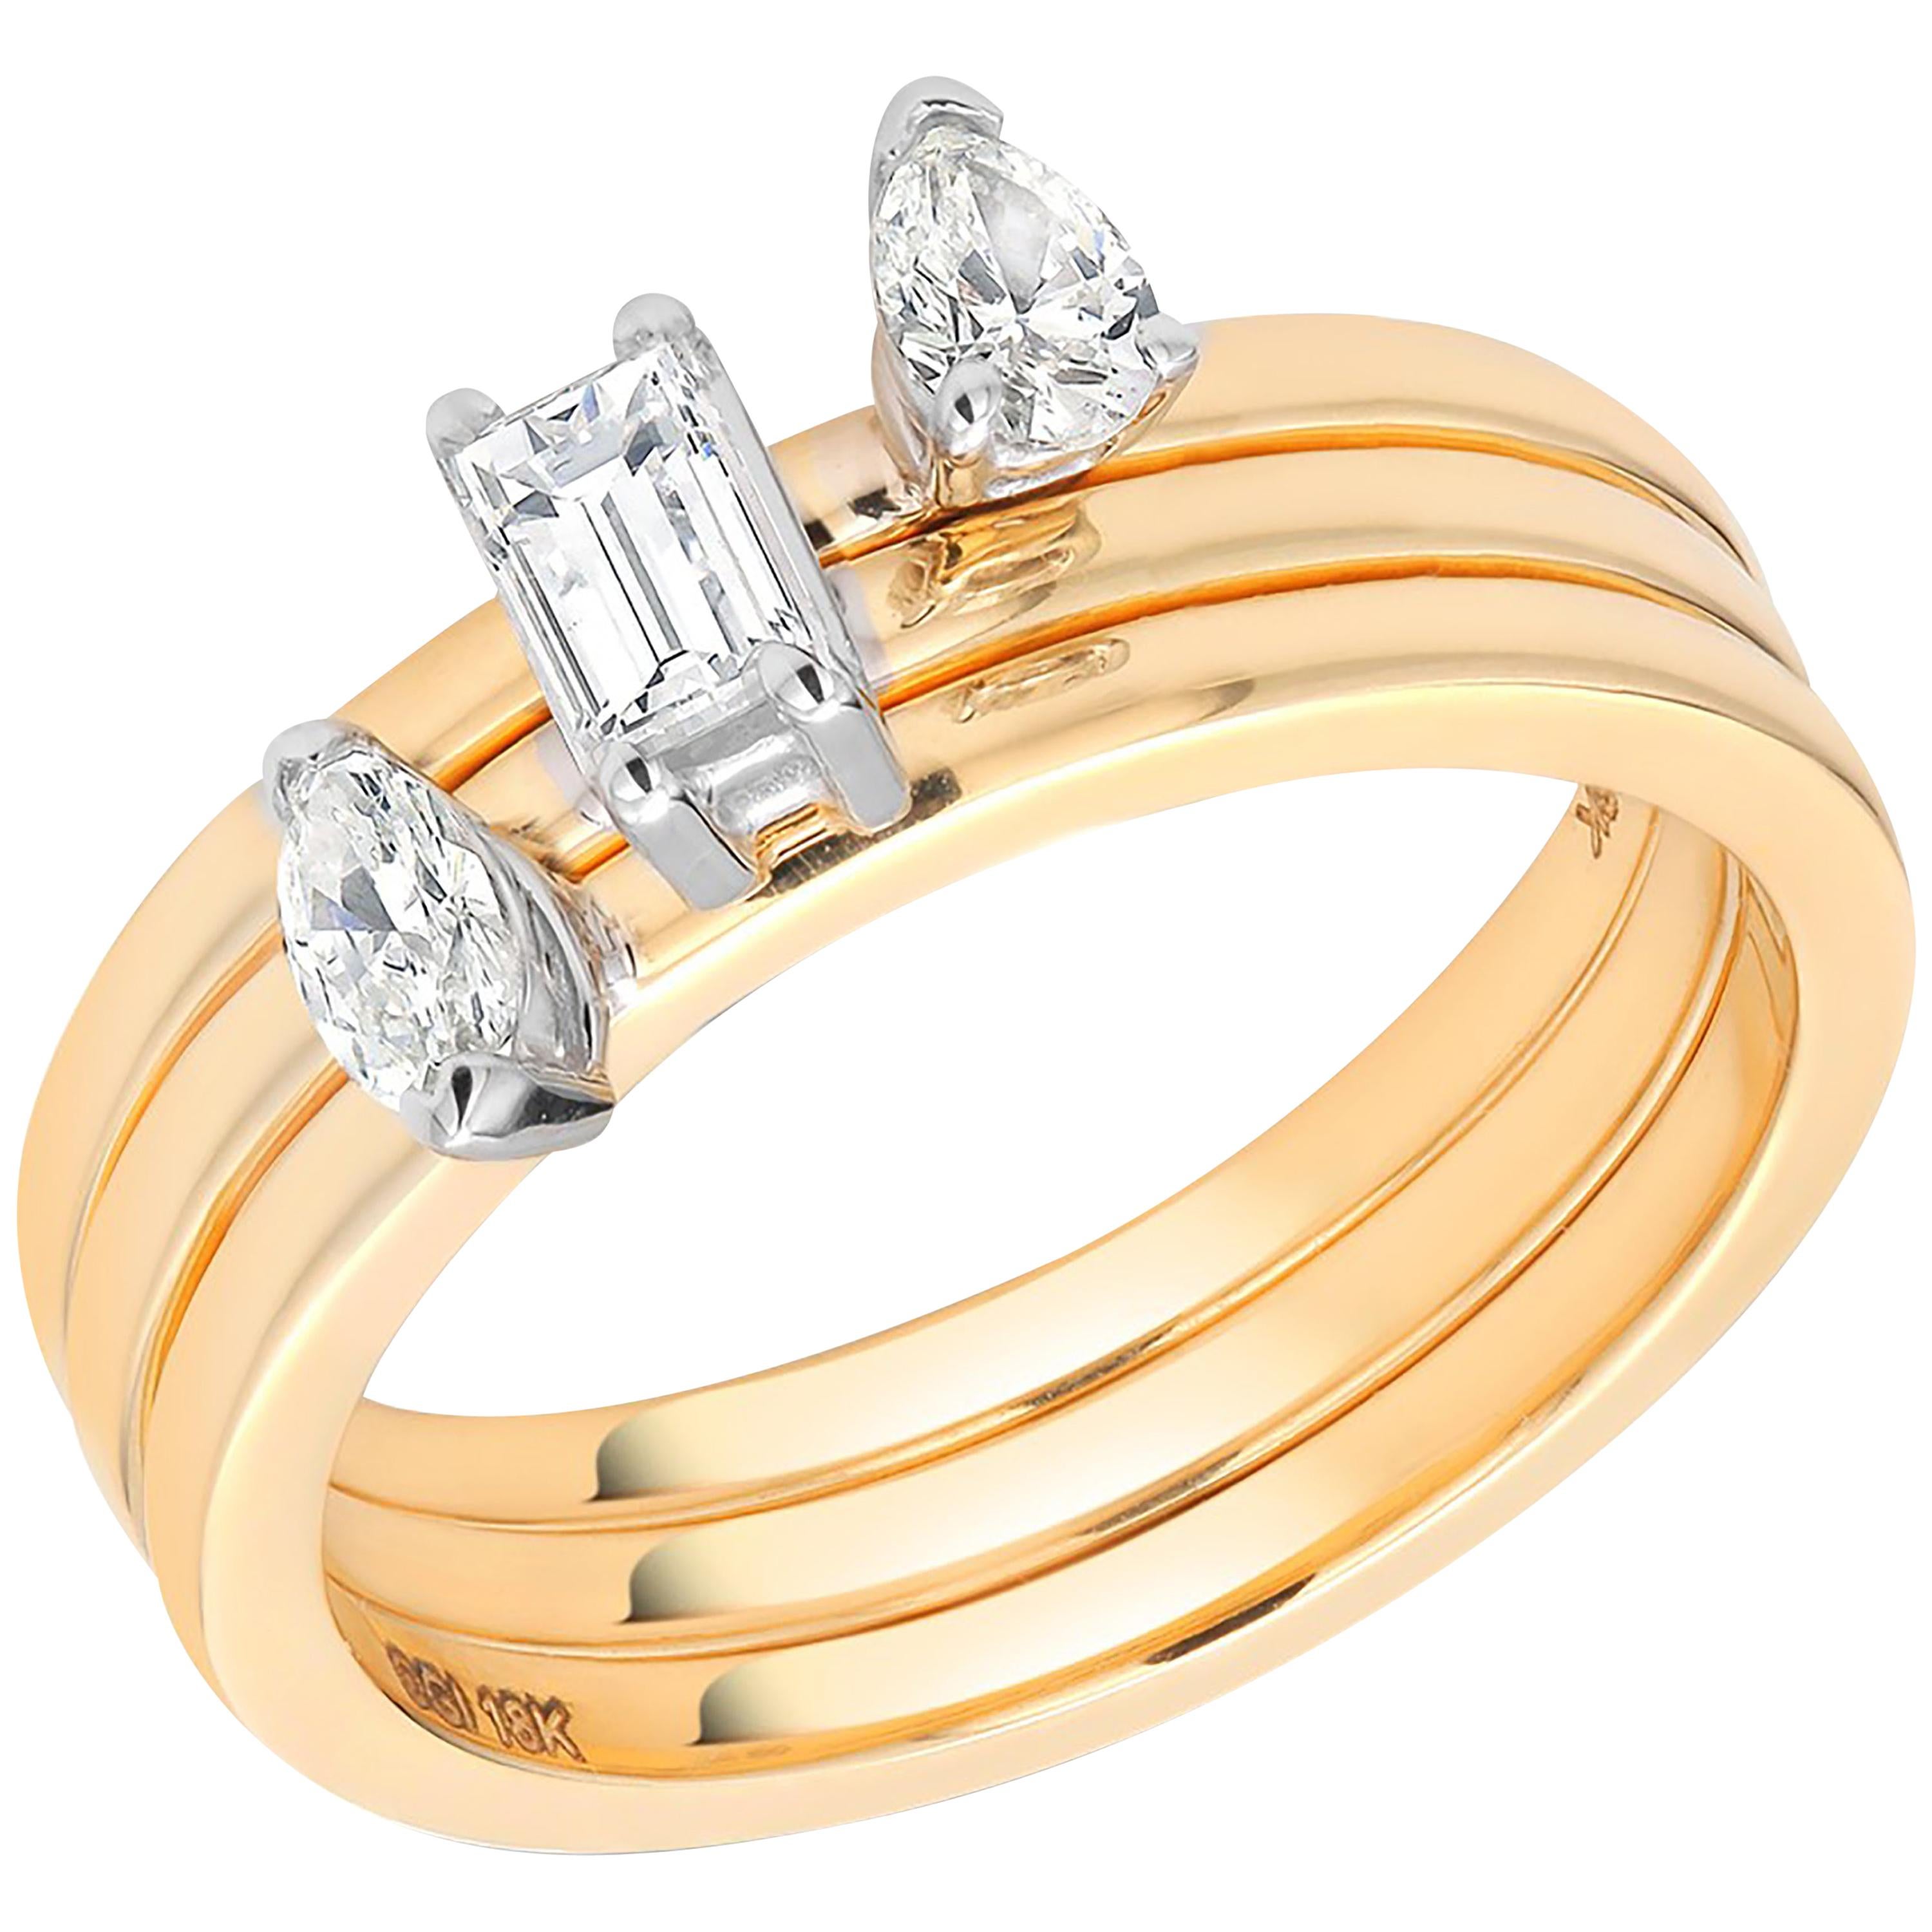 Three-Diamond Yellow Gold Stacking Bands Sold as a Set